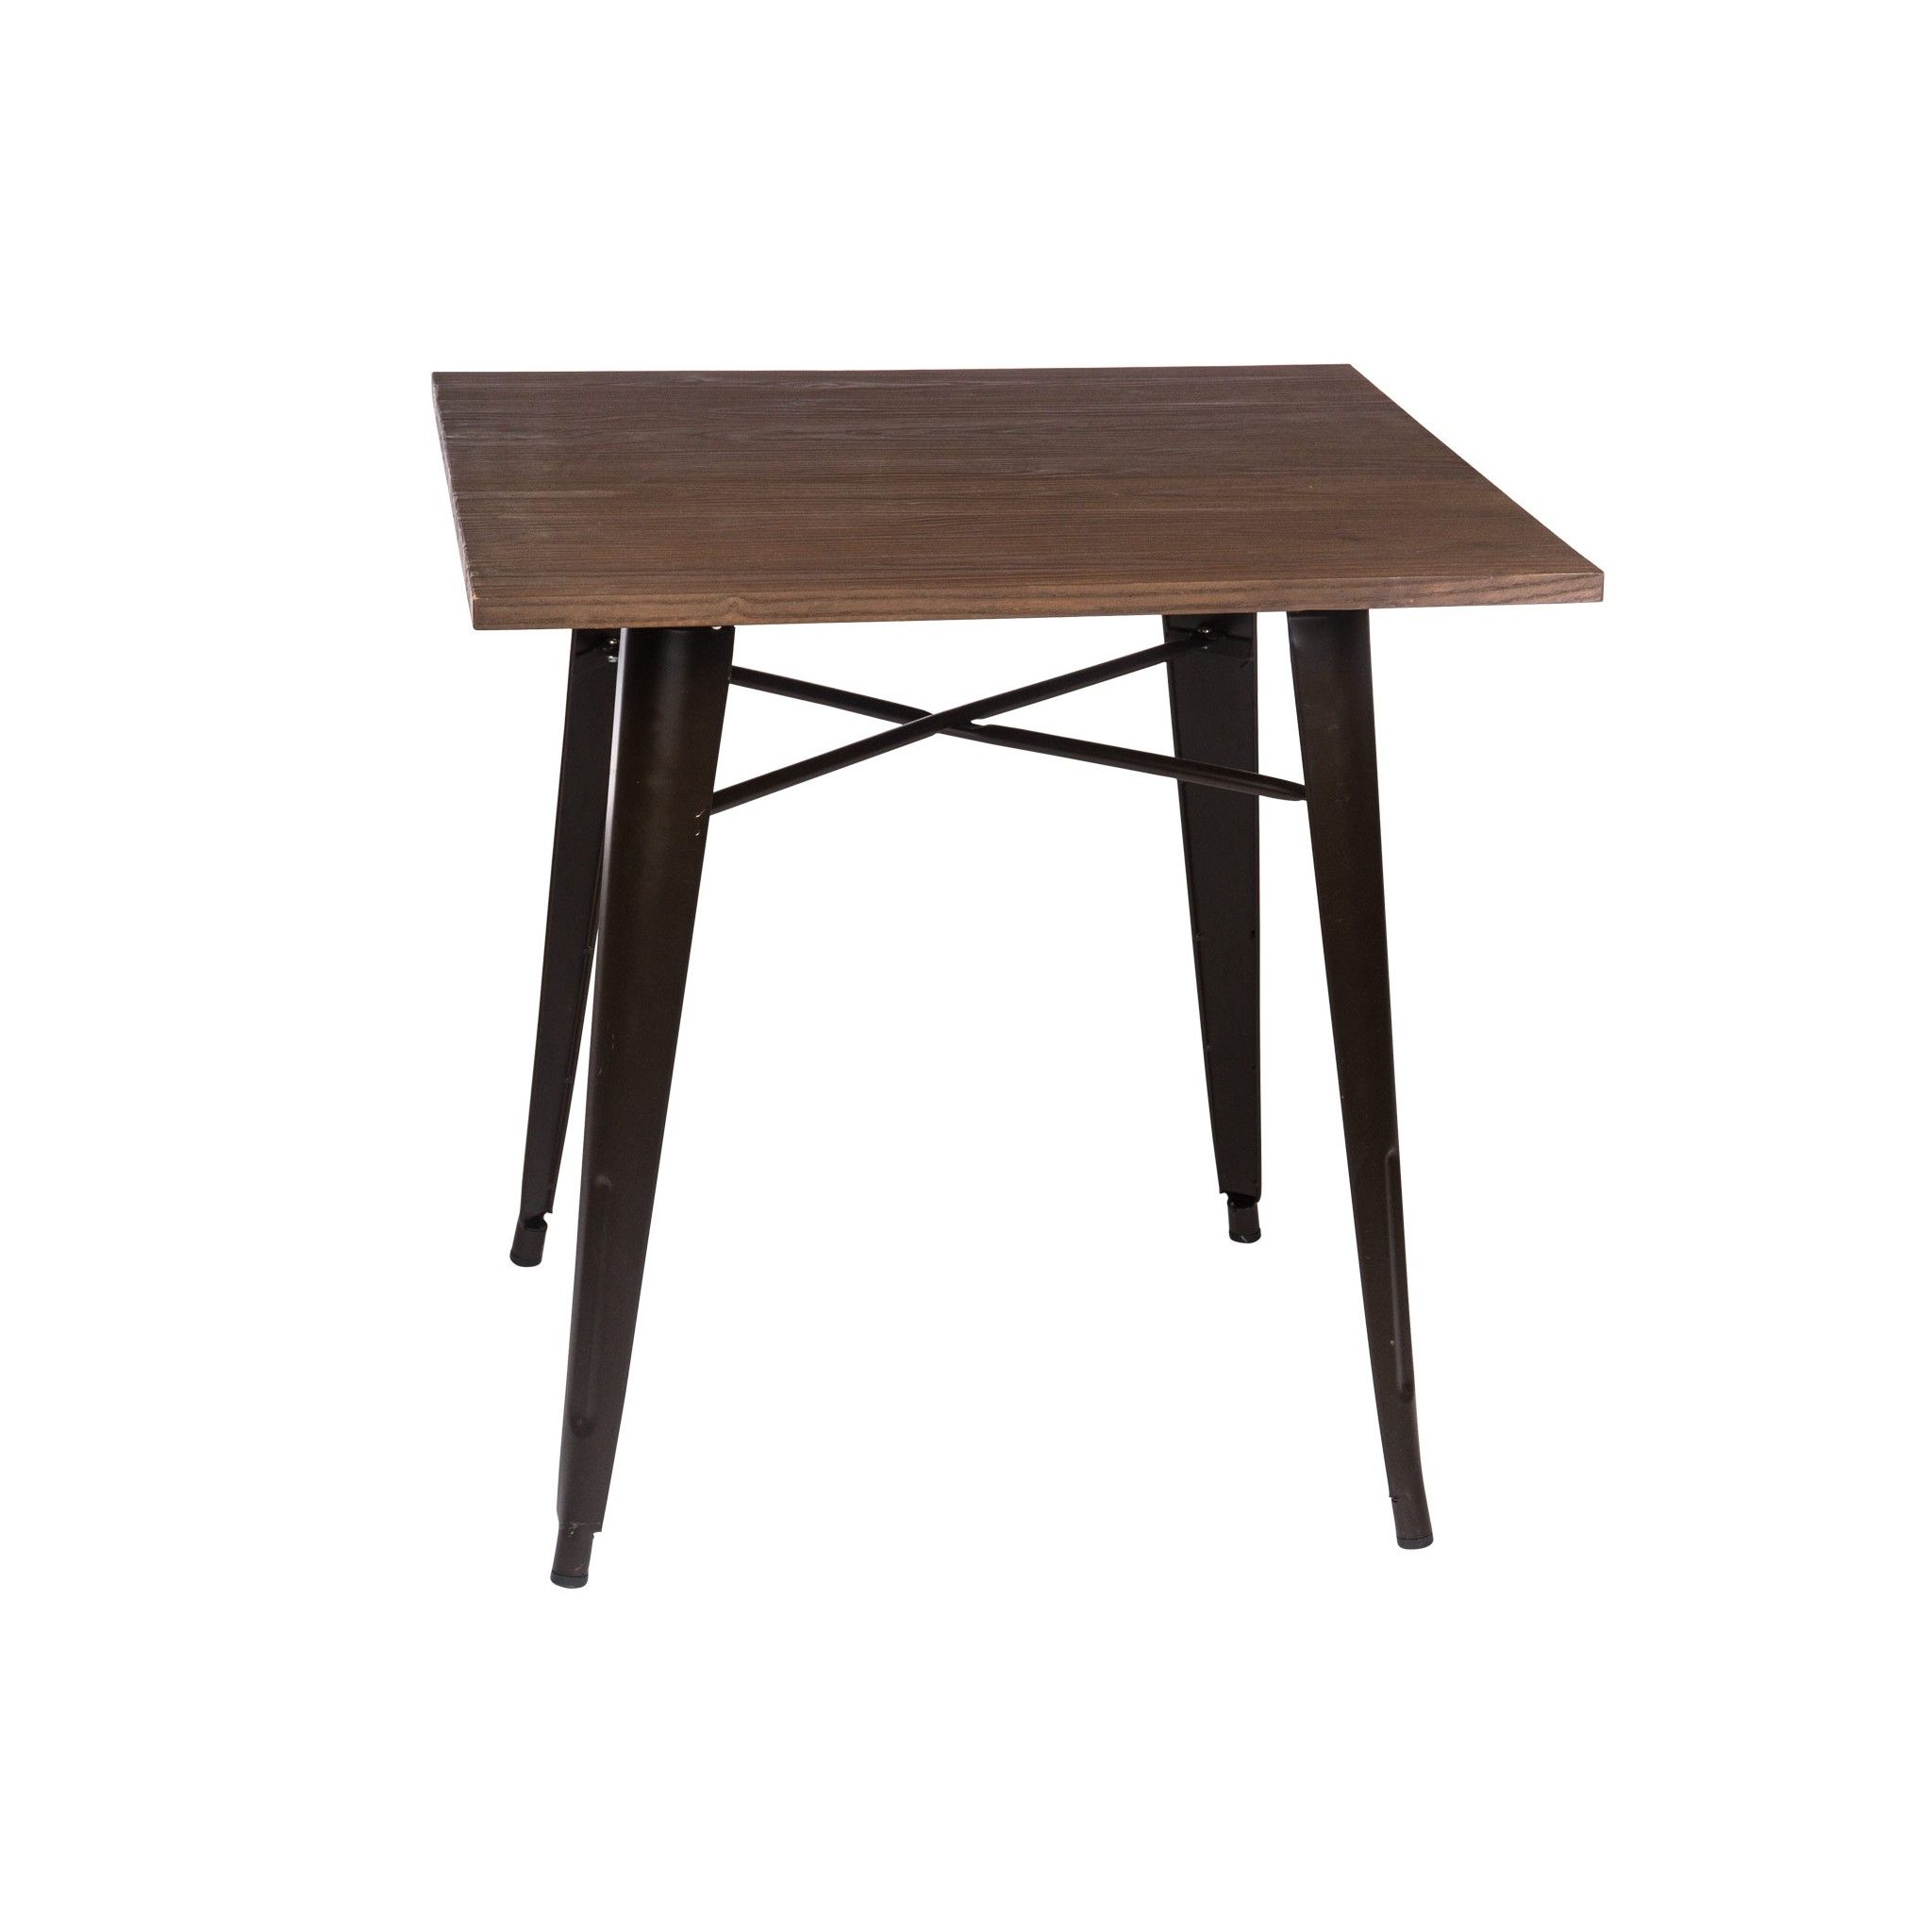 TABLE LANK WOOD 80X80 - Tables 